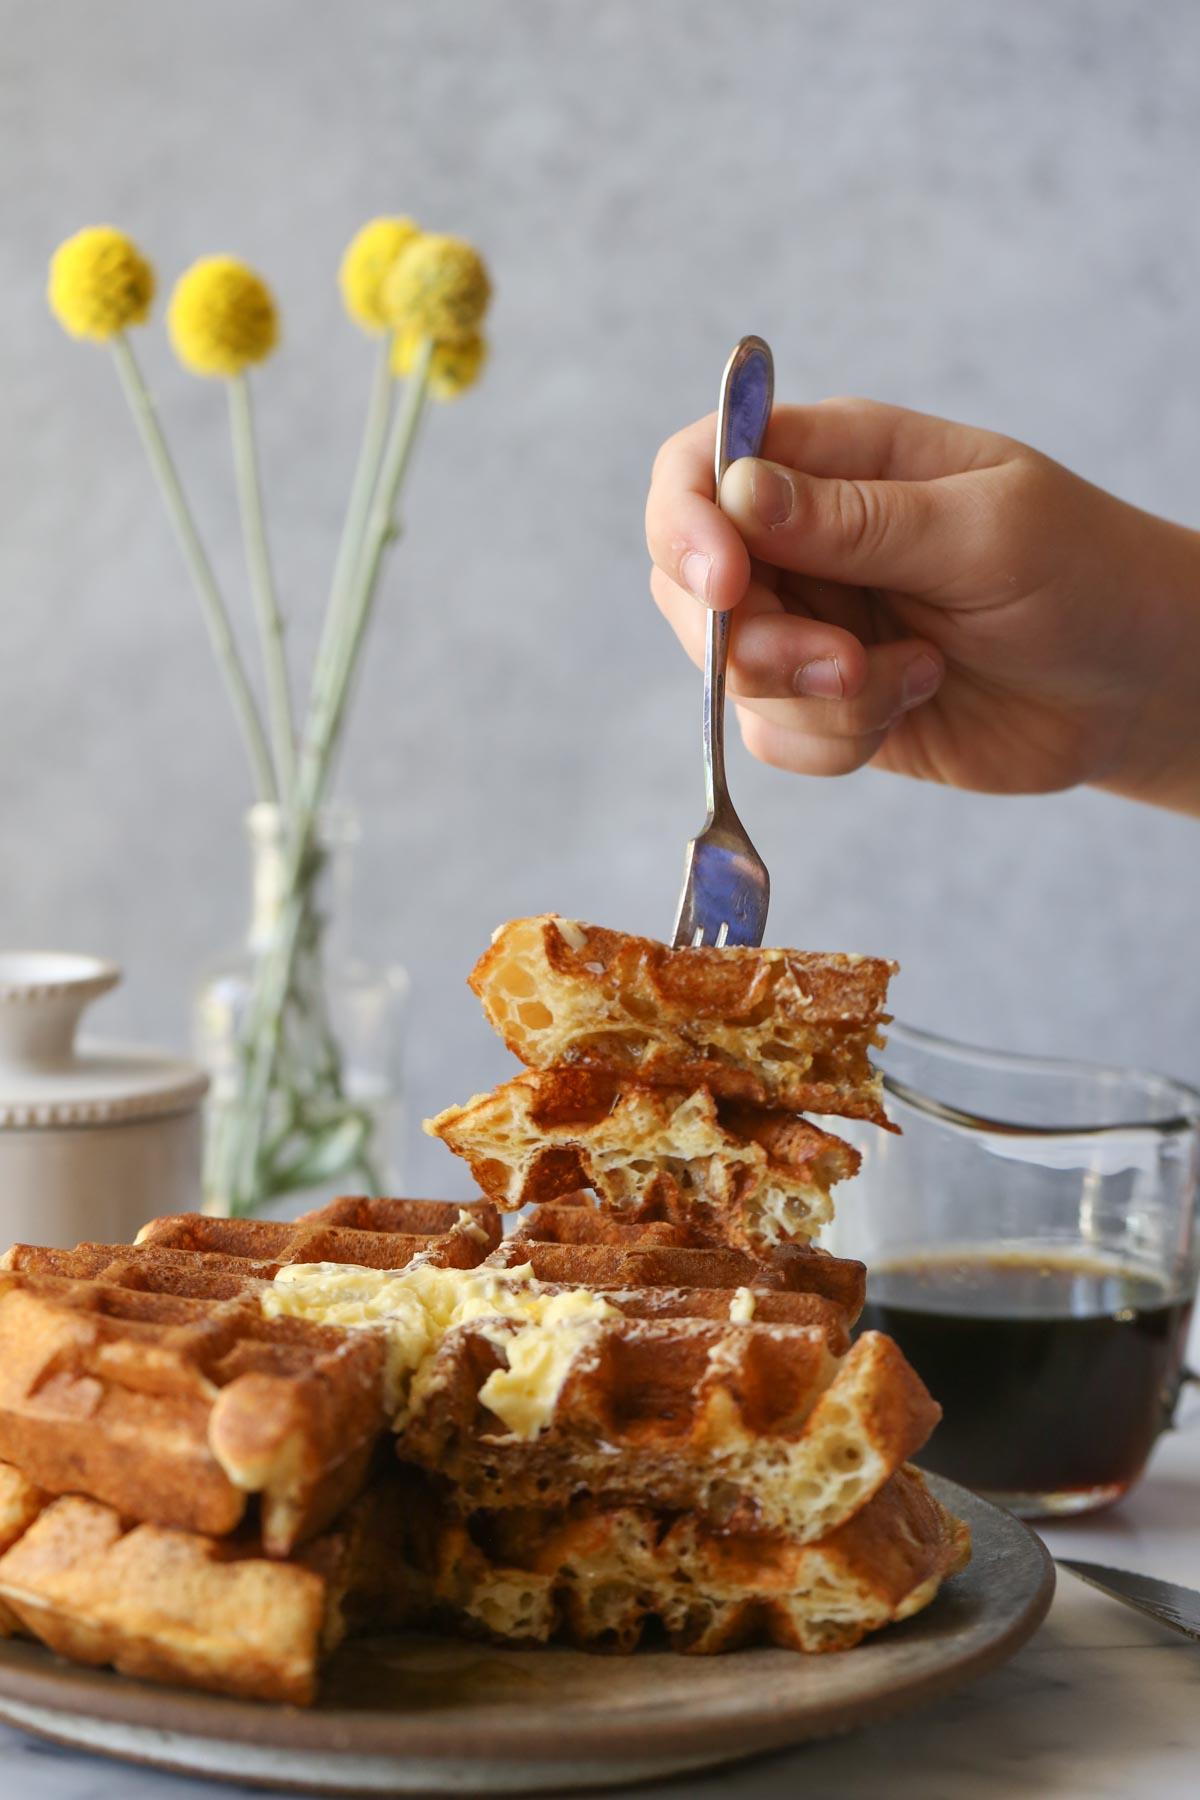 Two Overnight Sourdough Waffles stacked on a plate with a hand holding a fork poked into the waffles, with a mini glass pitcher of syrup, a butter dish and a vase with flowers in the background. 